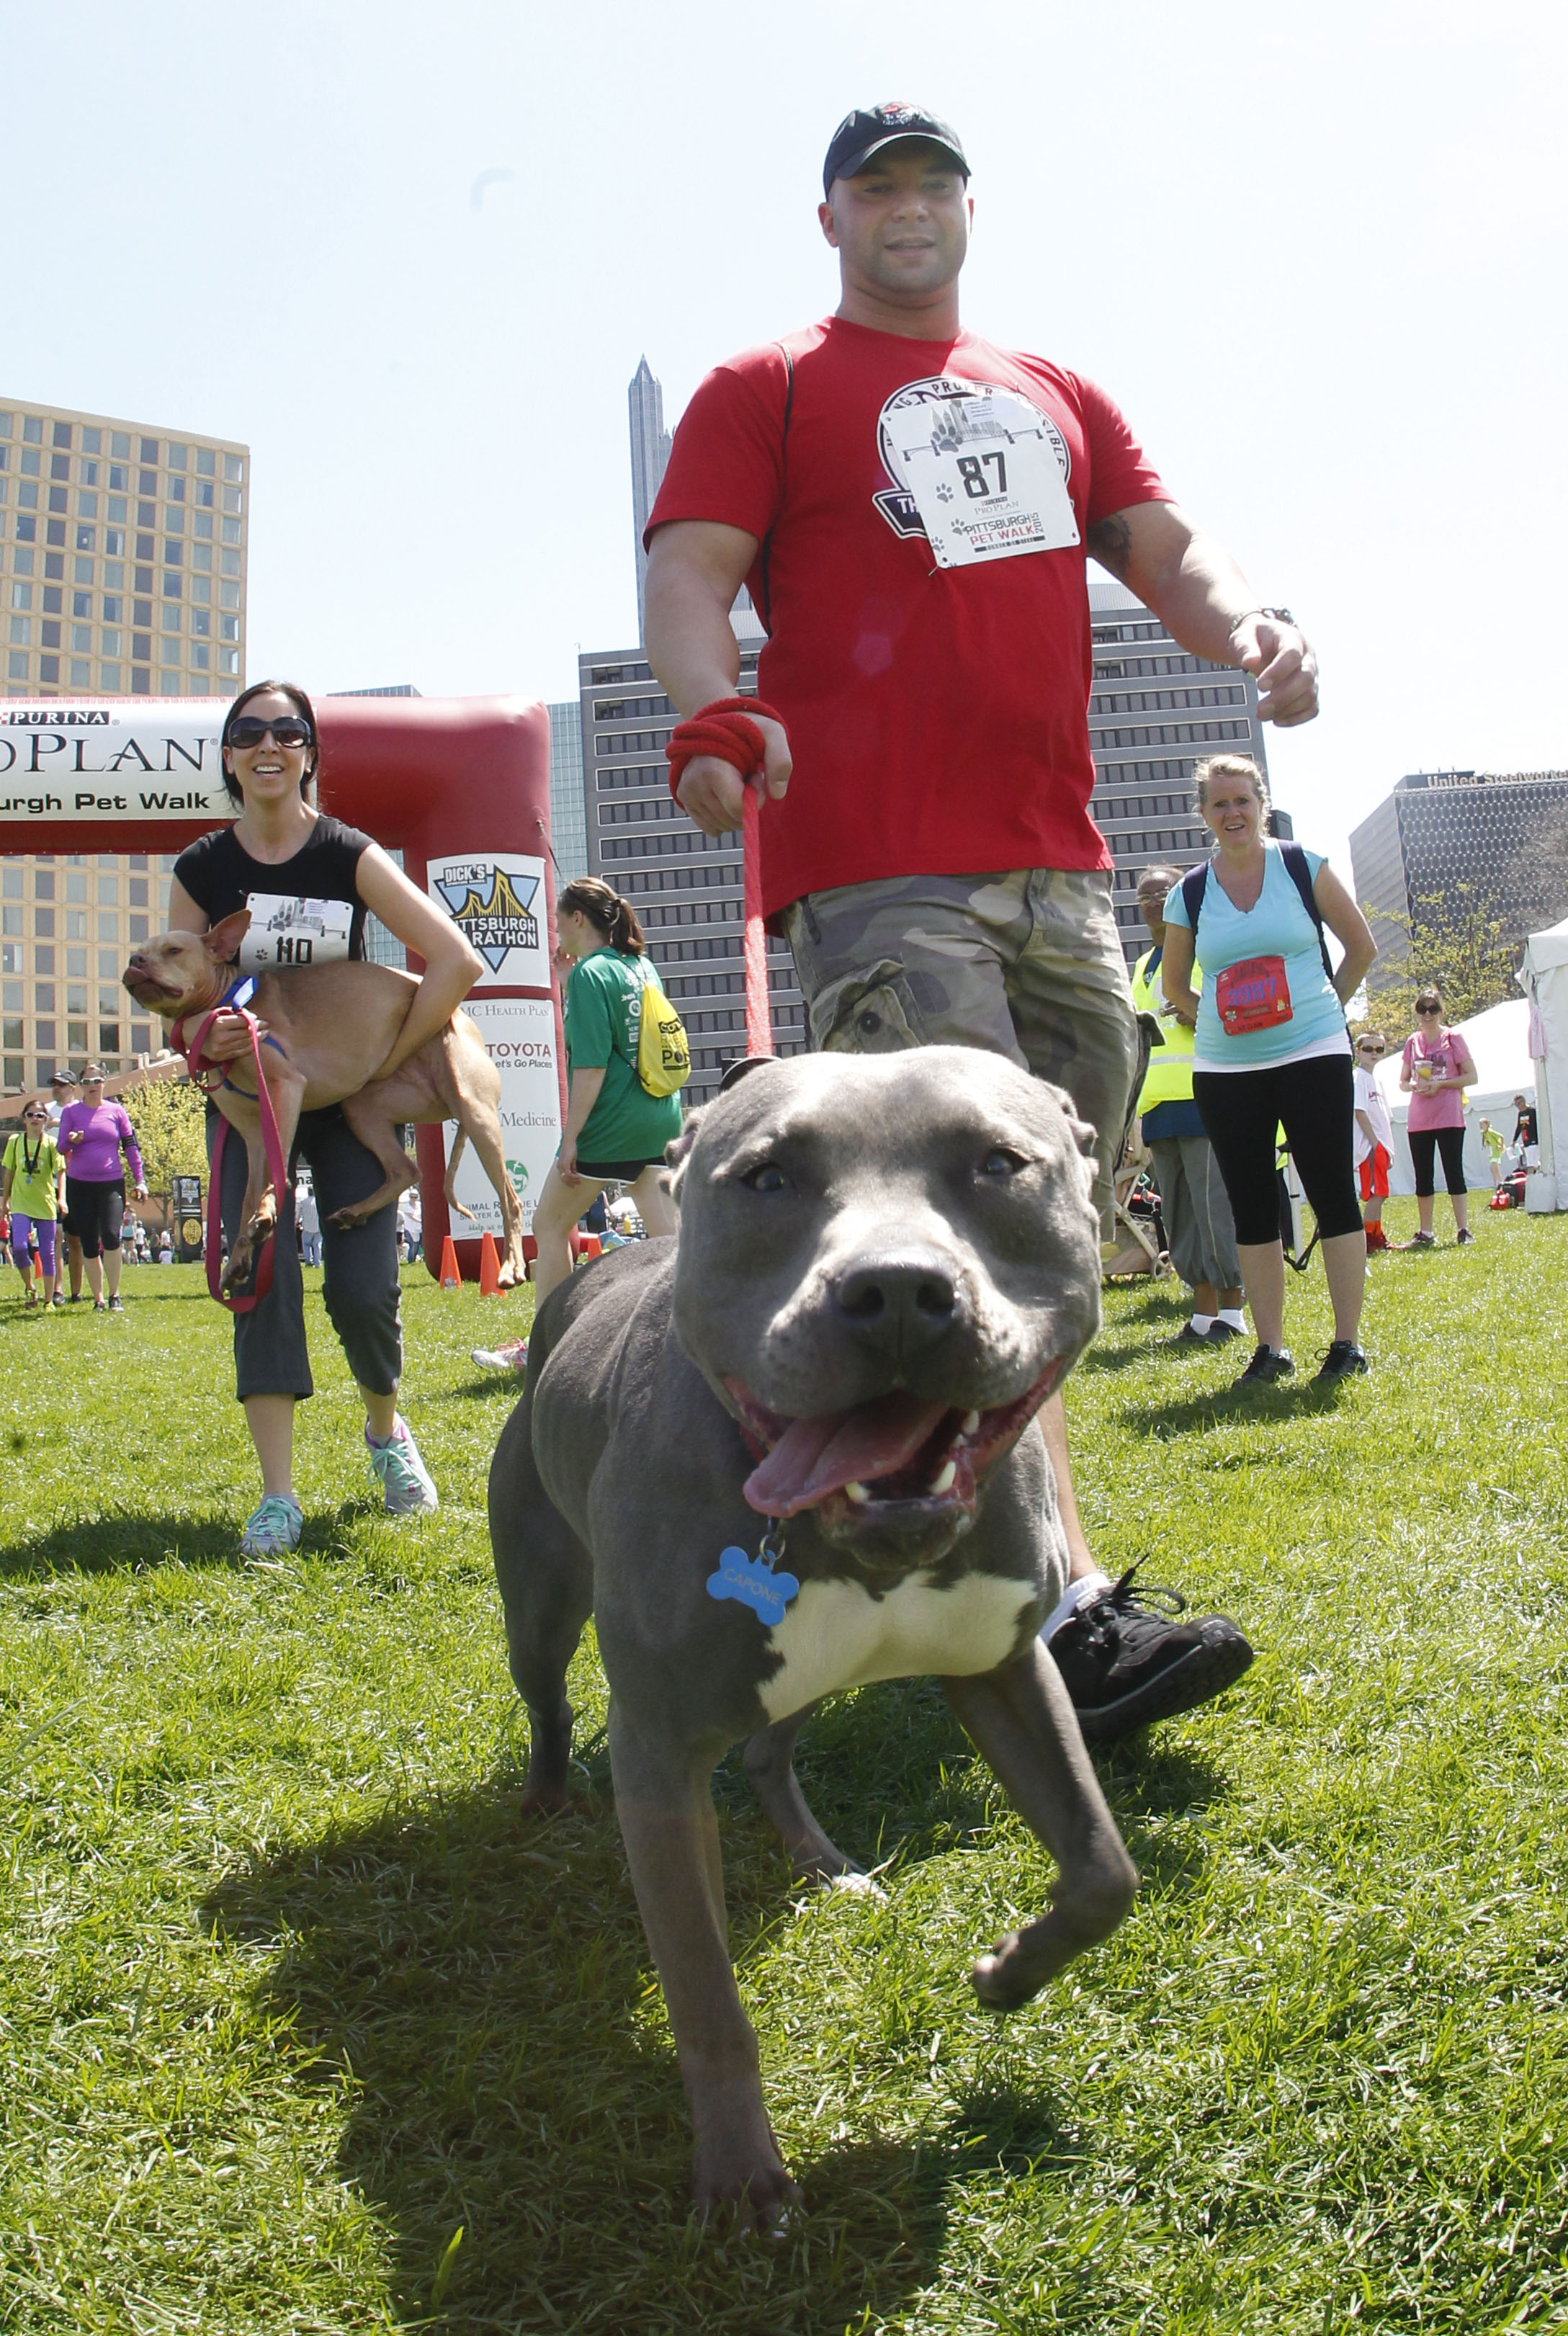 PITTSBURGH, PA - May 2, 2015: The Purina Pro Plan Pittsburgh Pet walk takes place in Point State Park on Saturday May 2, 2015. The Pittsburgh Marathon takes place on May 3, 2015 in Pittsburgh, Pennsylvania.